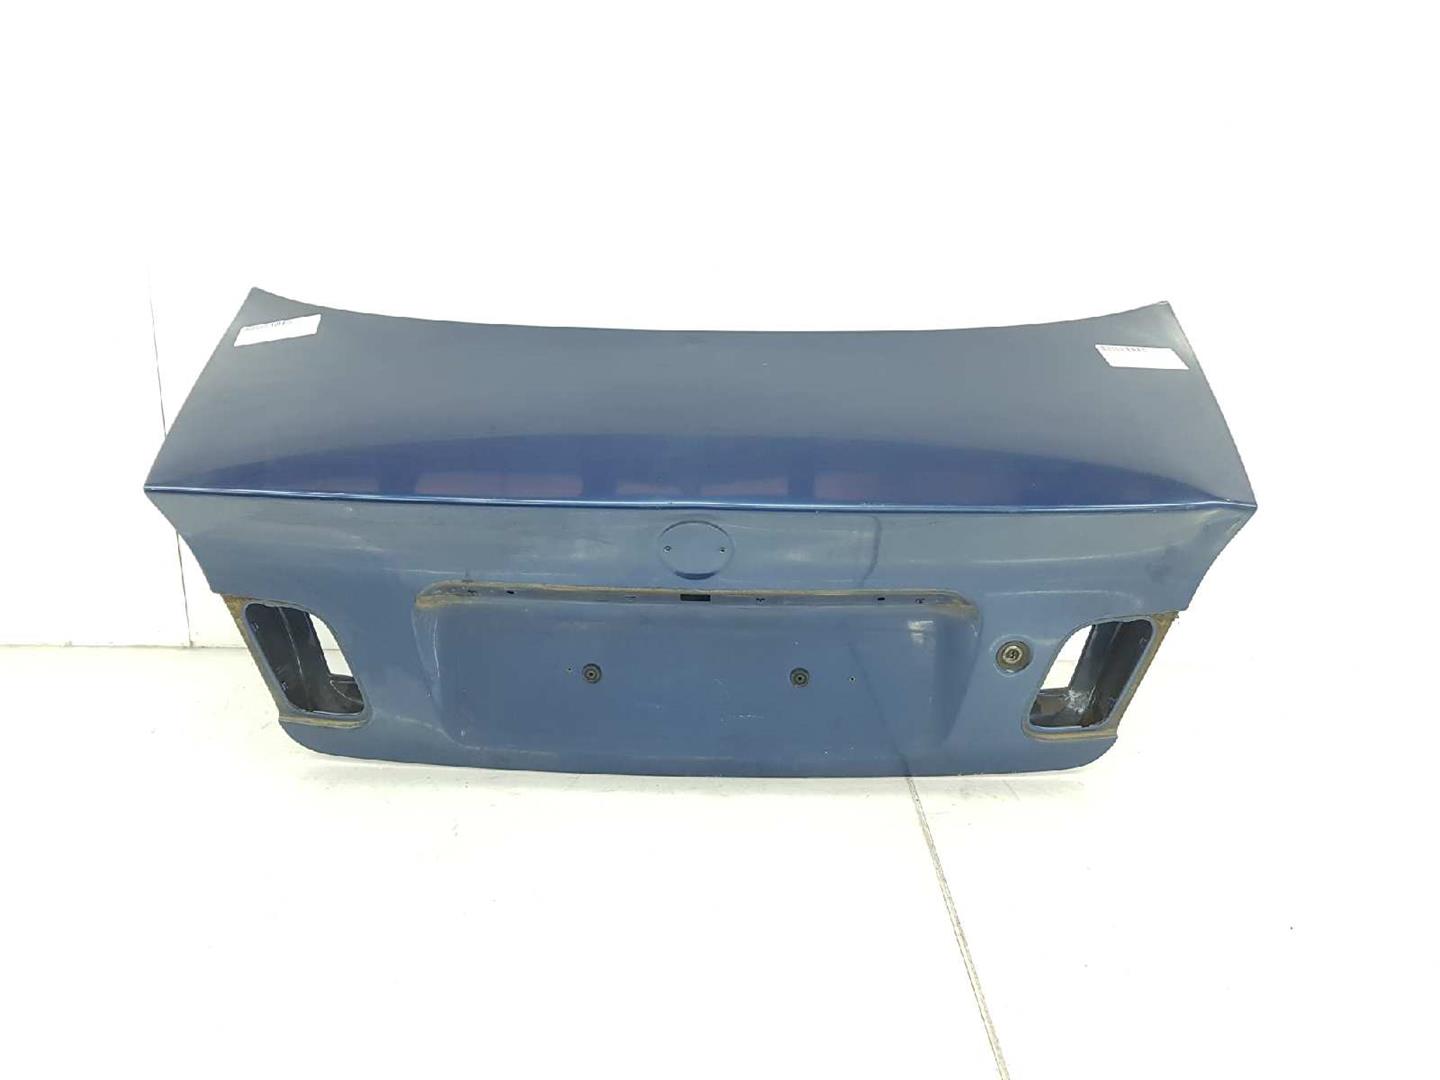 BMW 3 Series E46 (1997-2006) Bootlid Rear Boot 41627003314, 41627003314 19624670